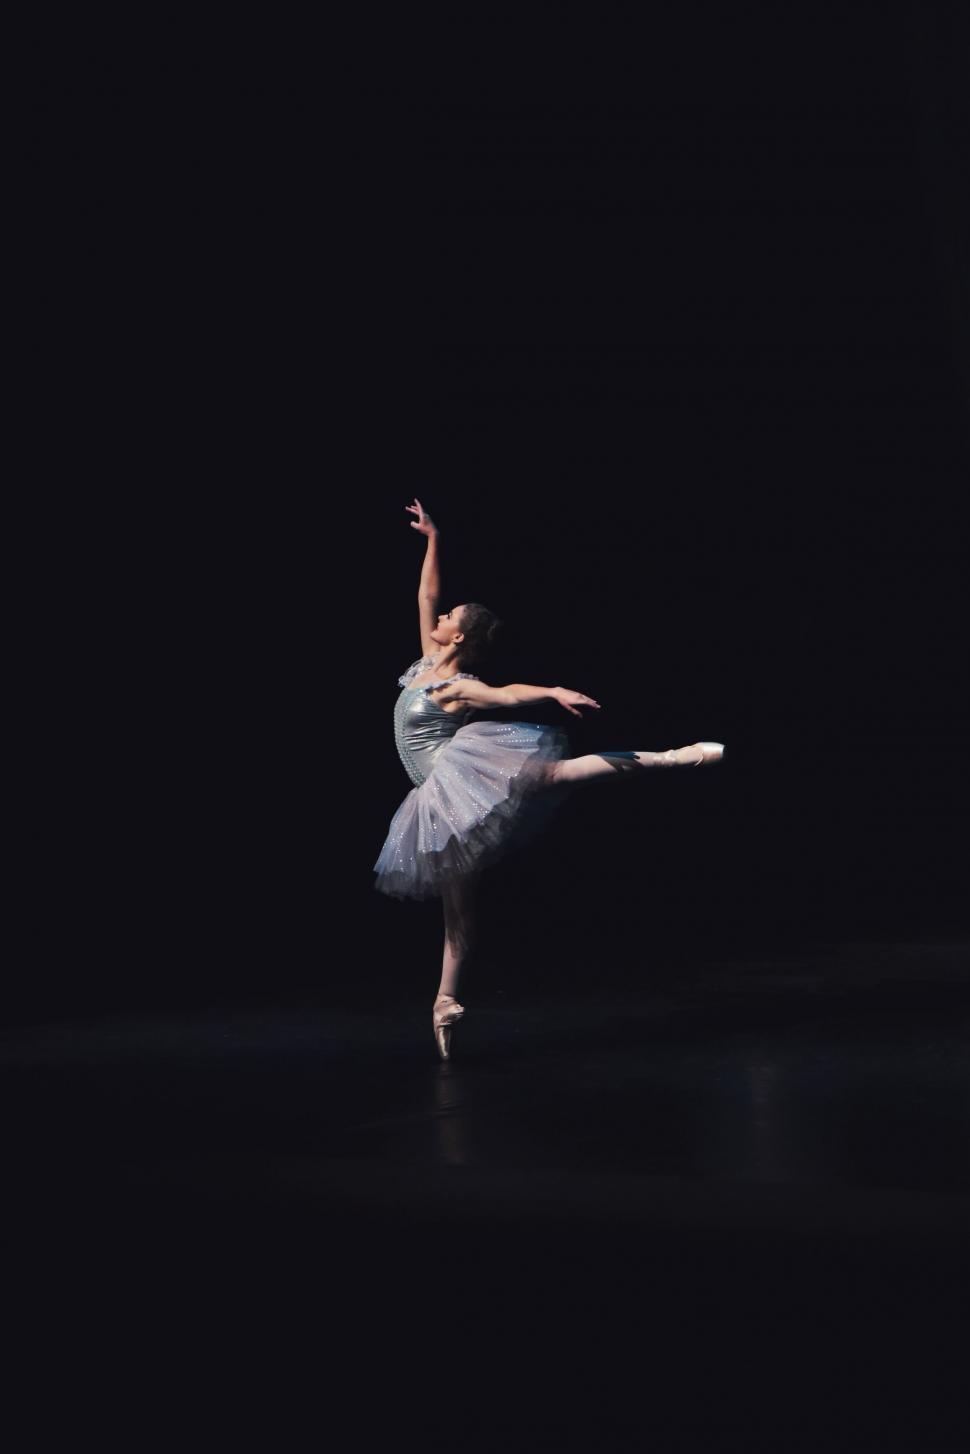 Free Image of Graceful ballerina performing on stage 